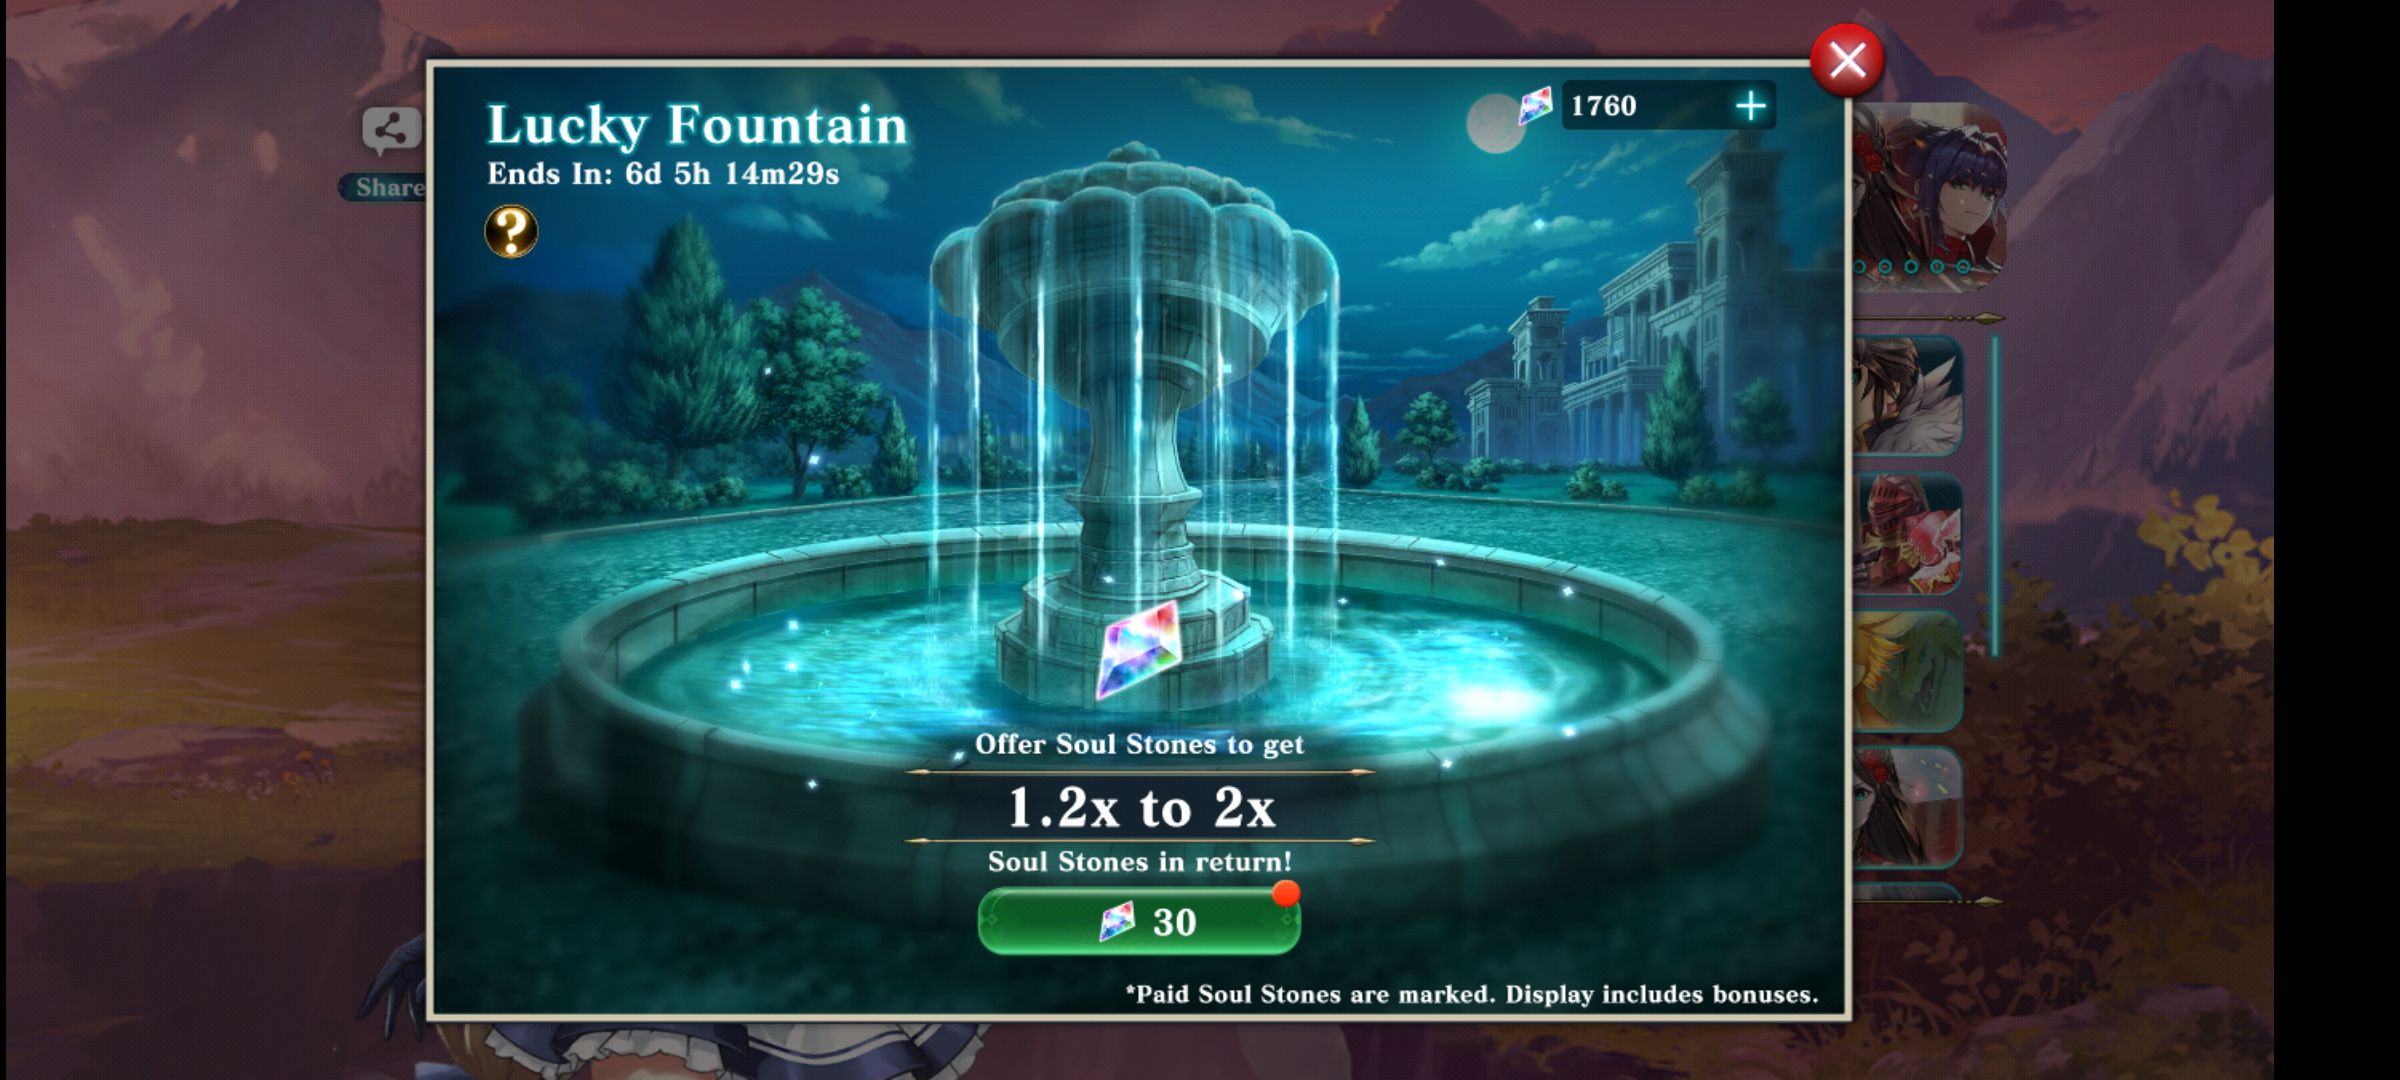 Accessing the Lucky Fountain in Evertale